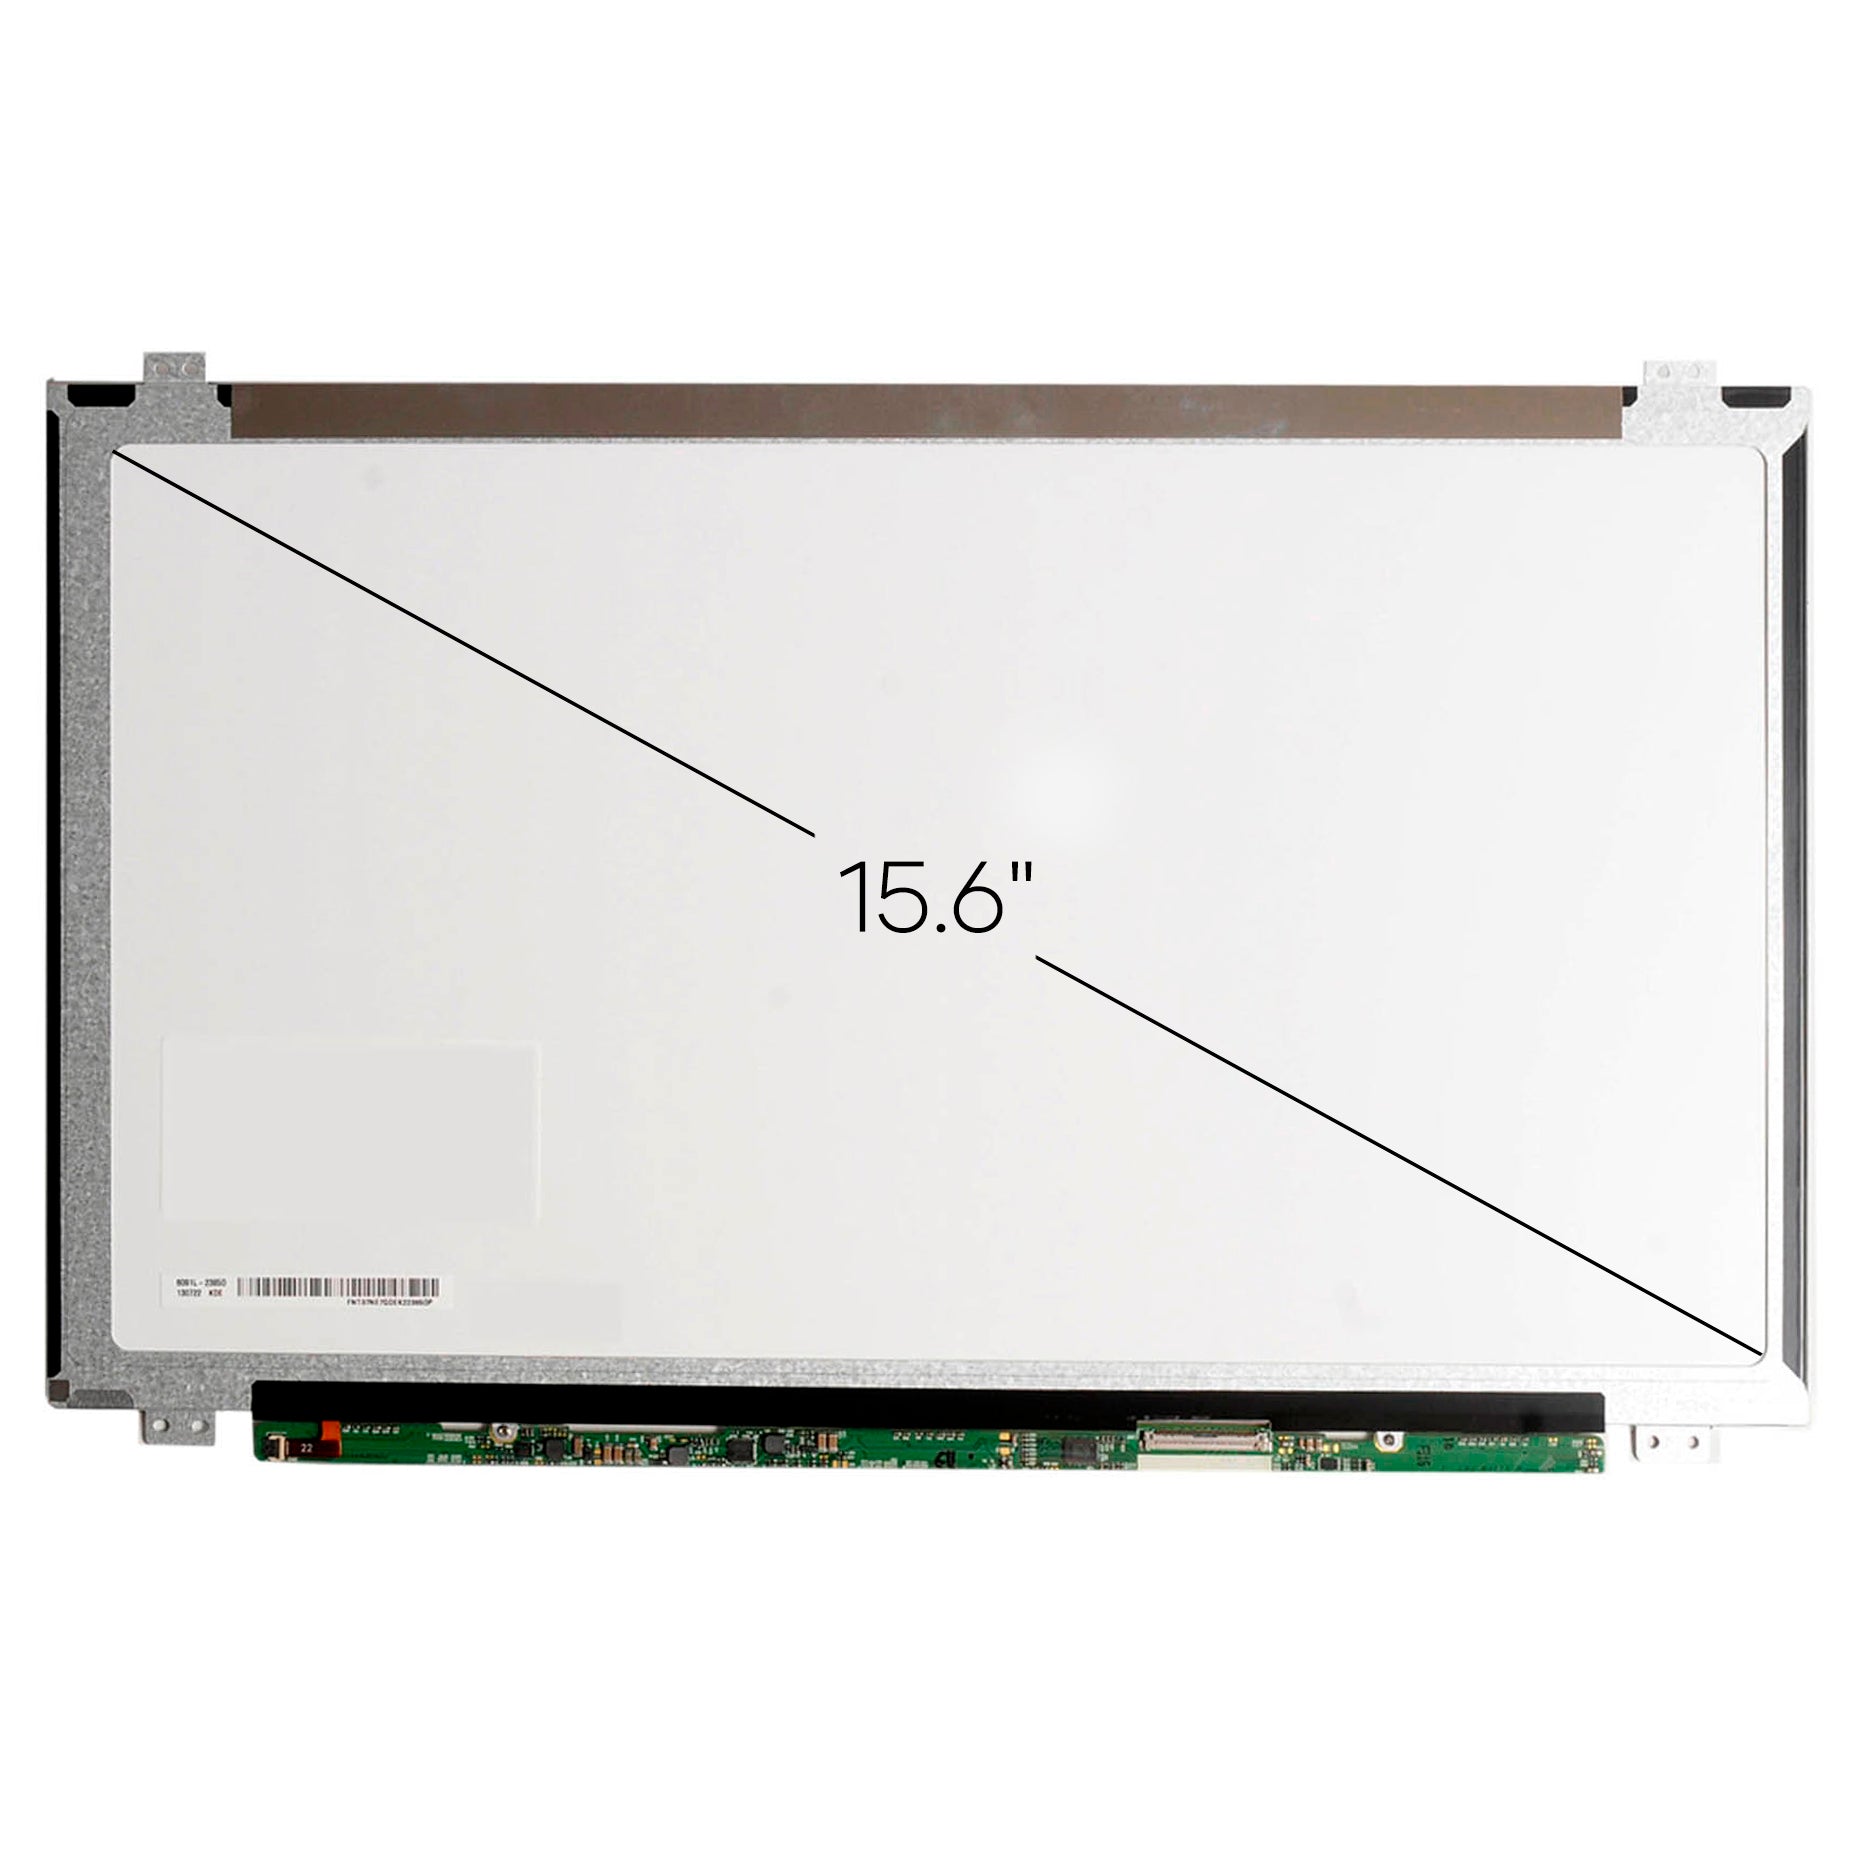 Replacement Screen For Acer Aspire V5-571-6830 HD 1366x768 Glossy LCD LED Display